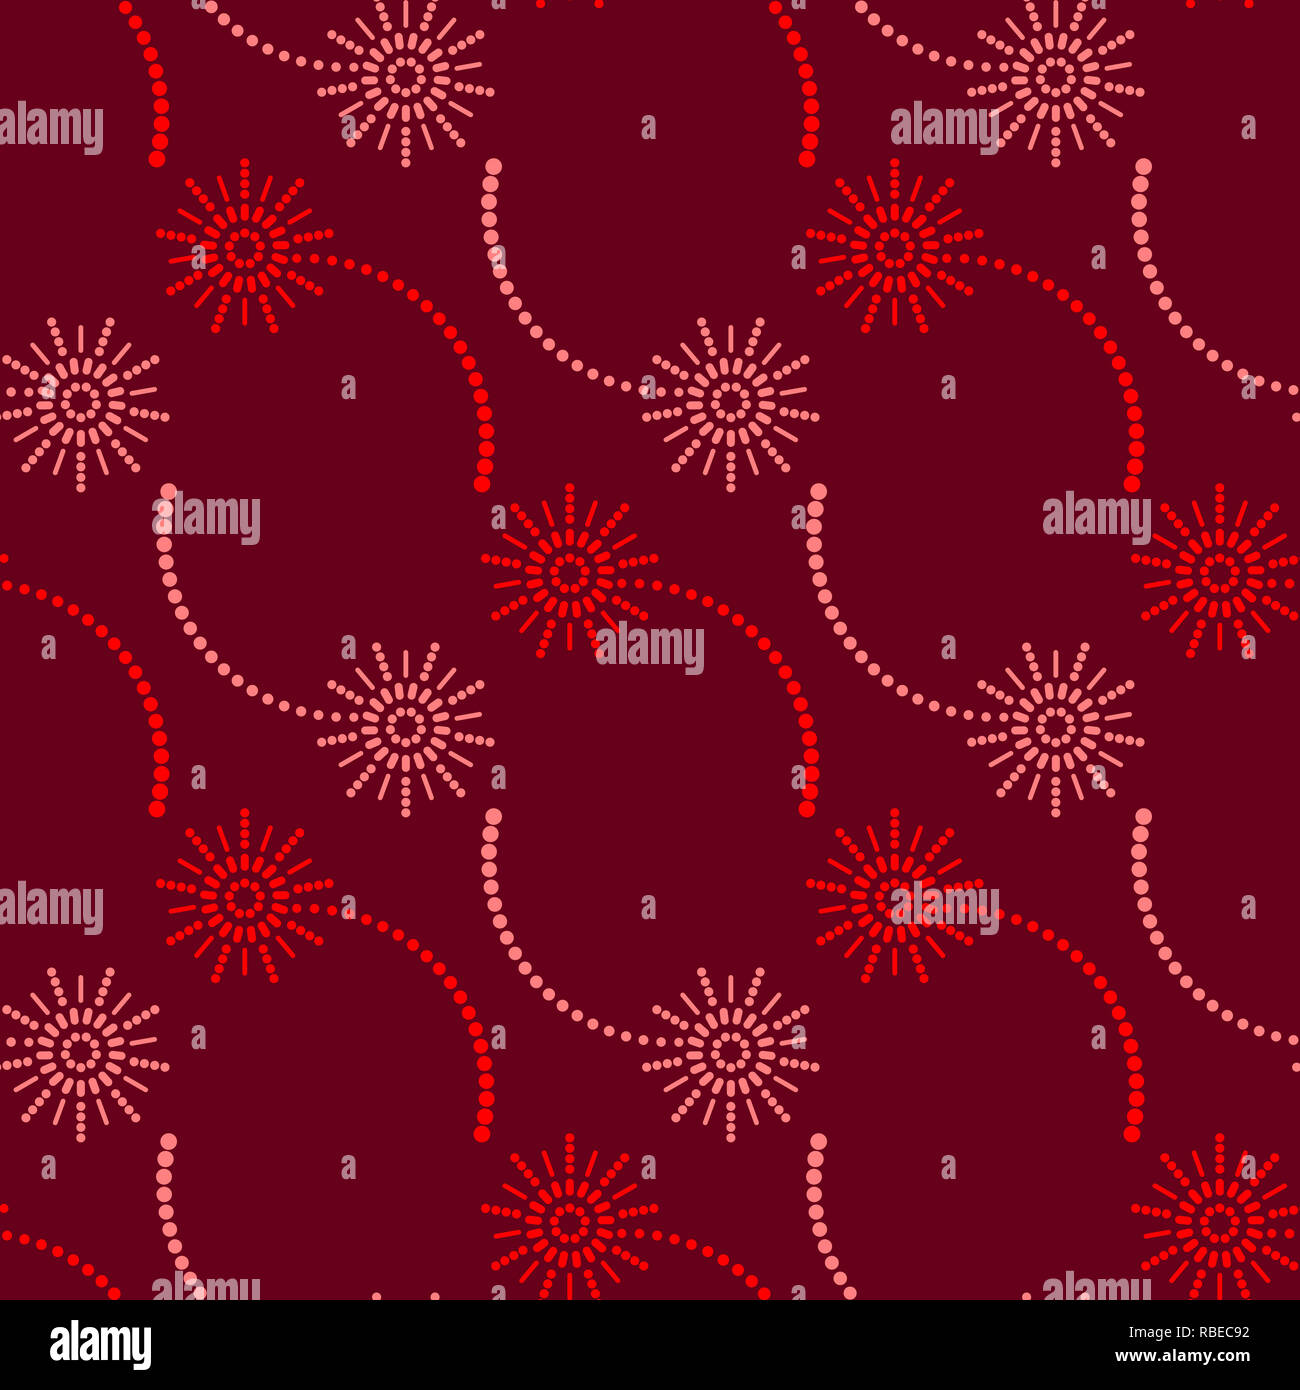 Abstract floral pattern in shades of red Stock Photo